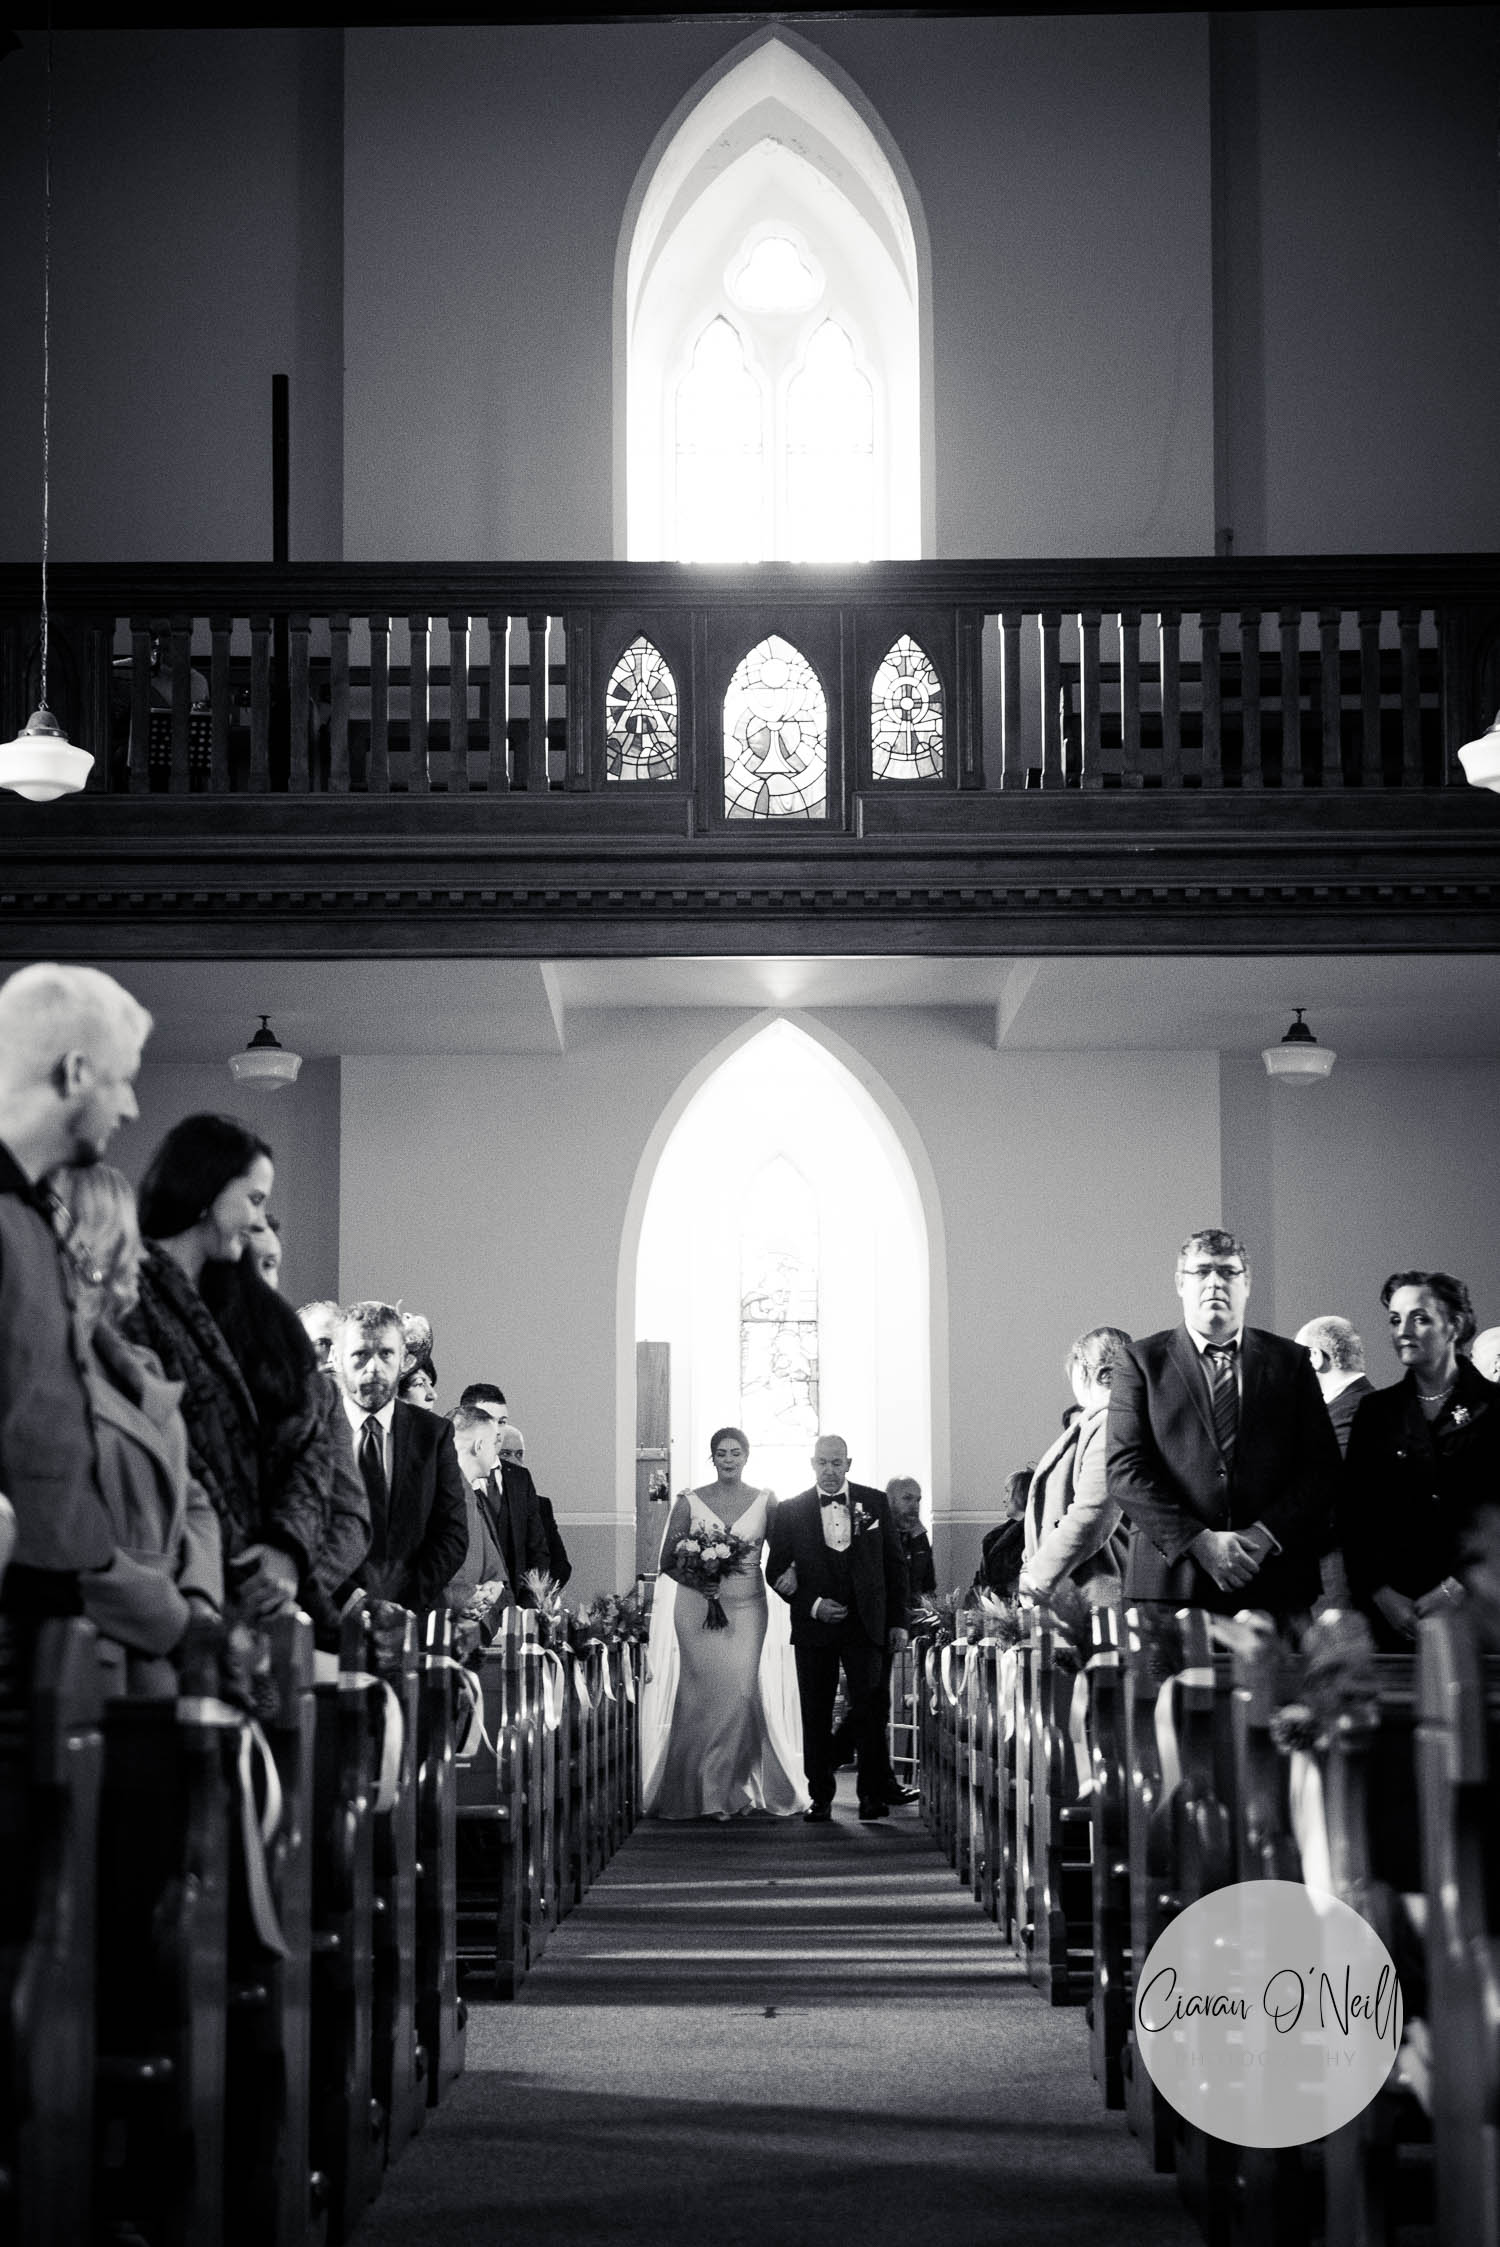 Father walks his daughter down the aisle of a large church